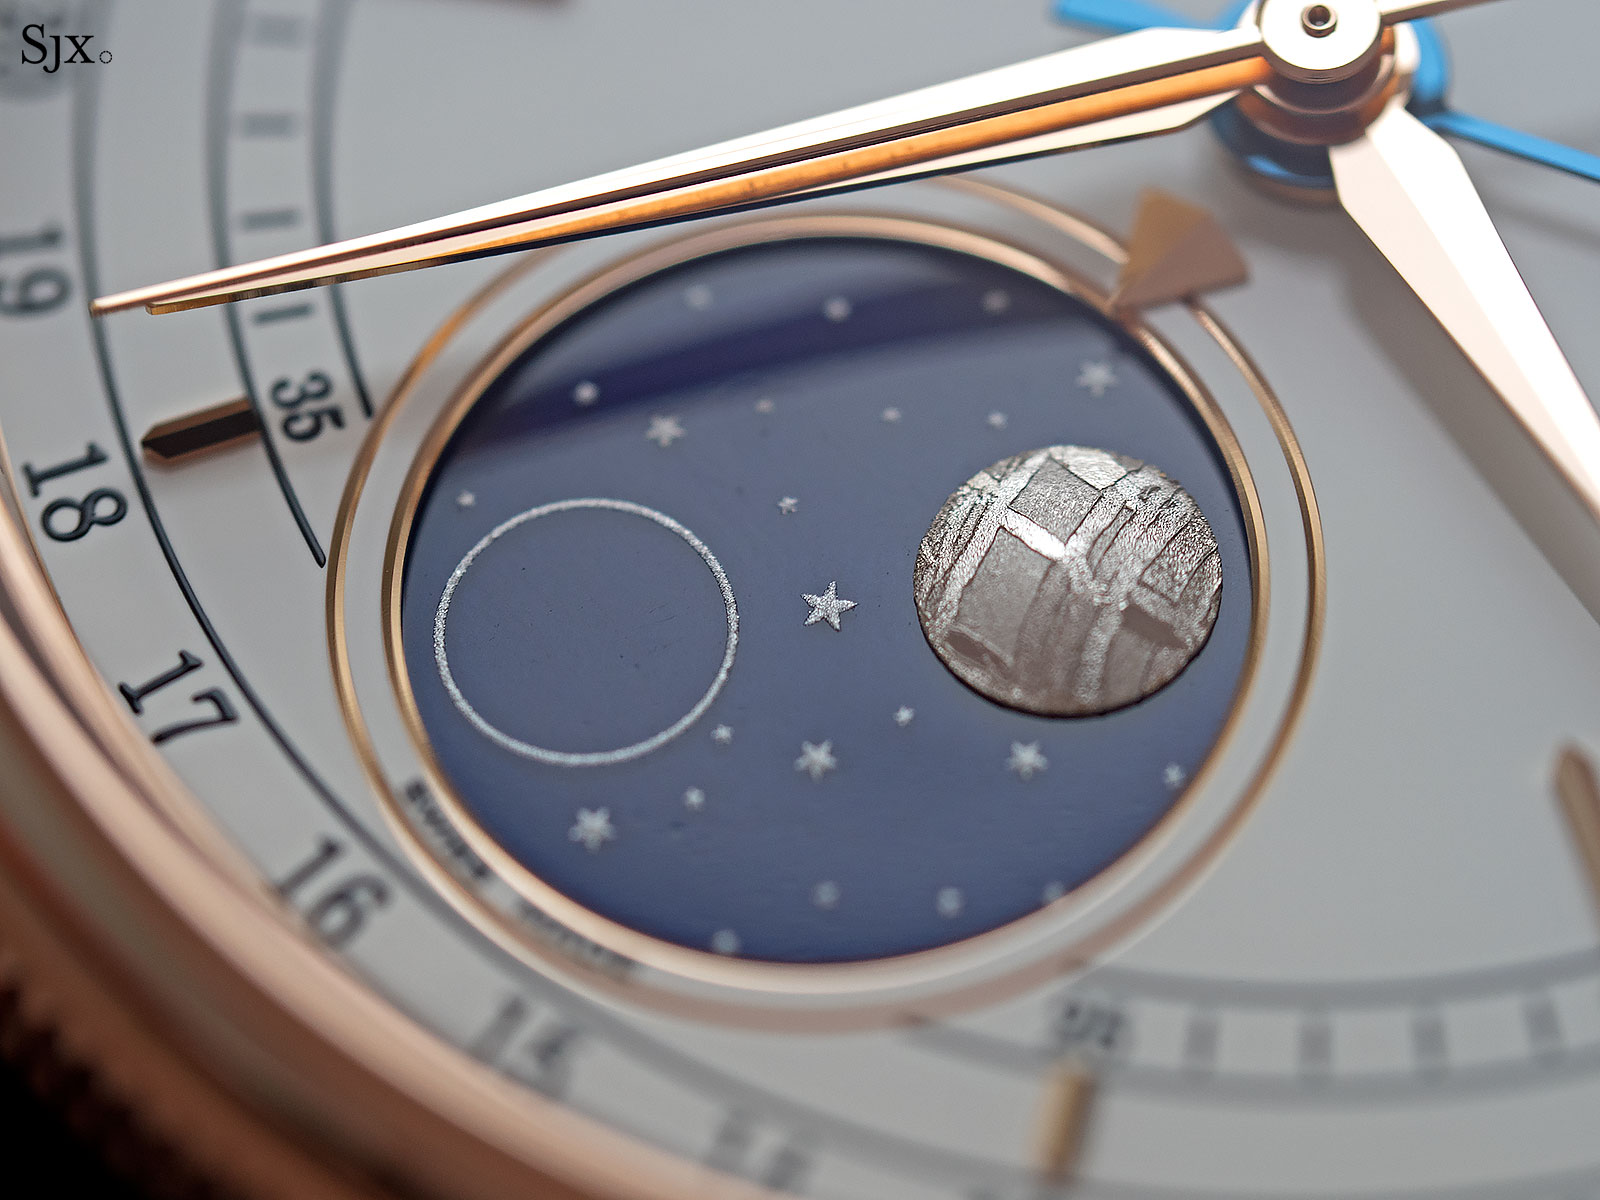 Rolex Cellini Moonphase 50535 review 6